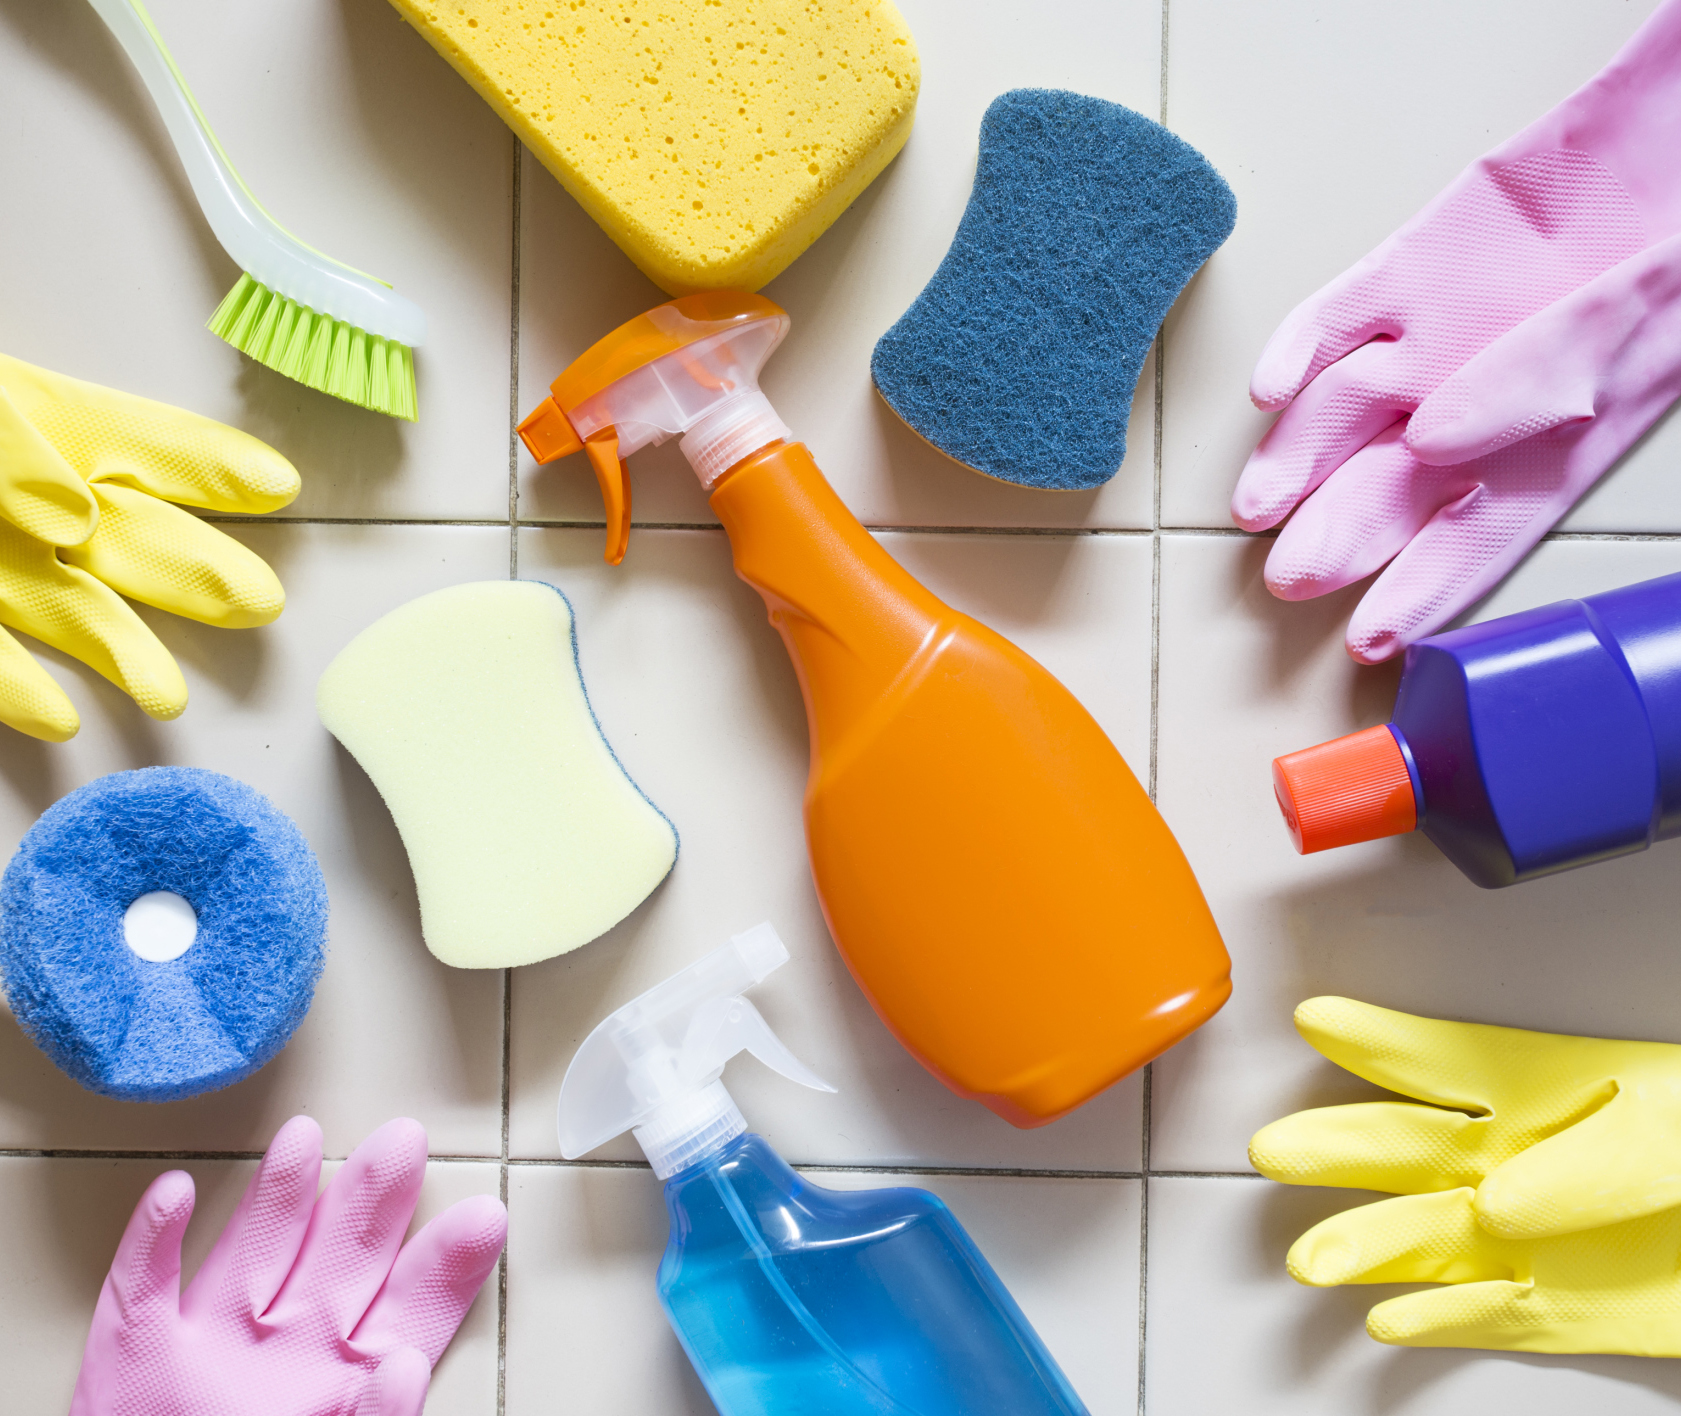 How to speed clean your whole house in an hour